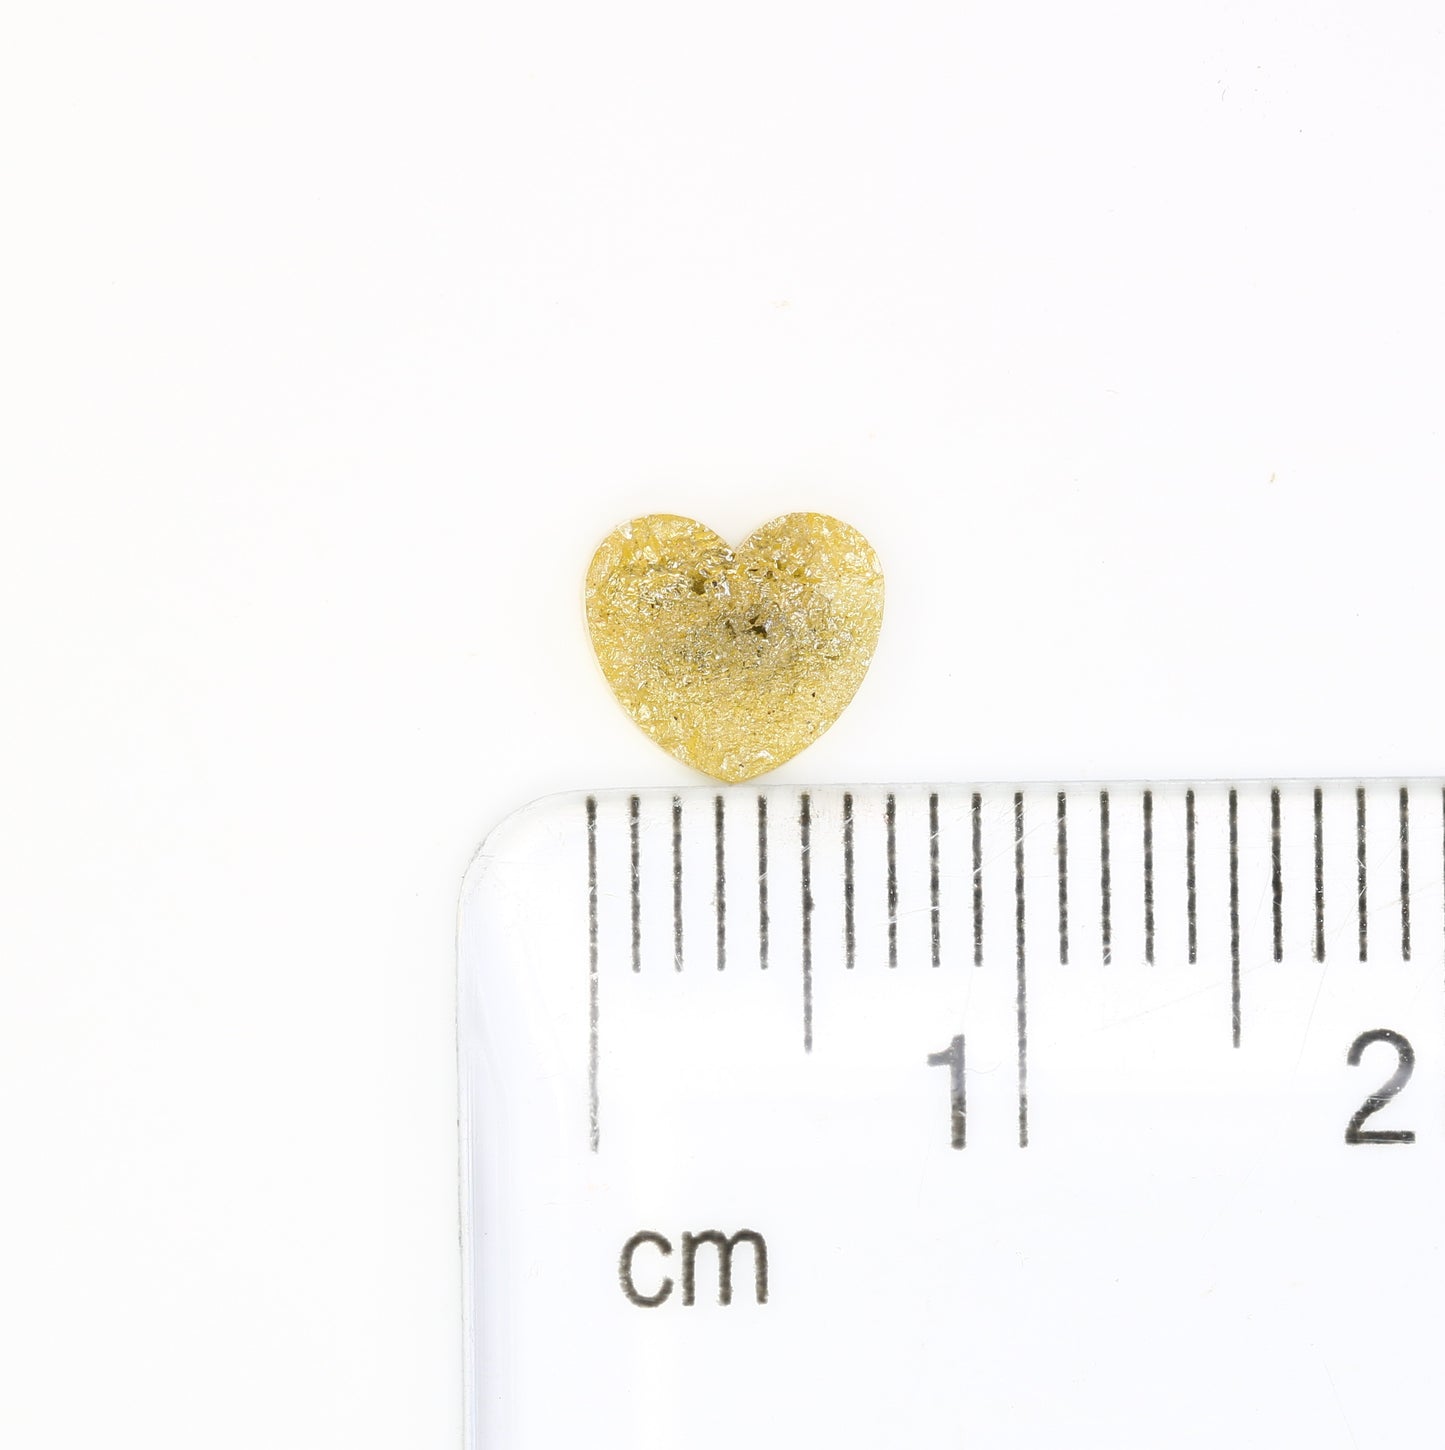 0.85 Carat Yellow Color Heart Shape Loose Raw Rough Diamond For Wedding Ring